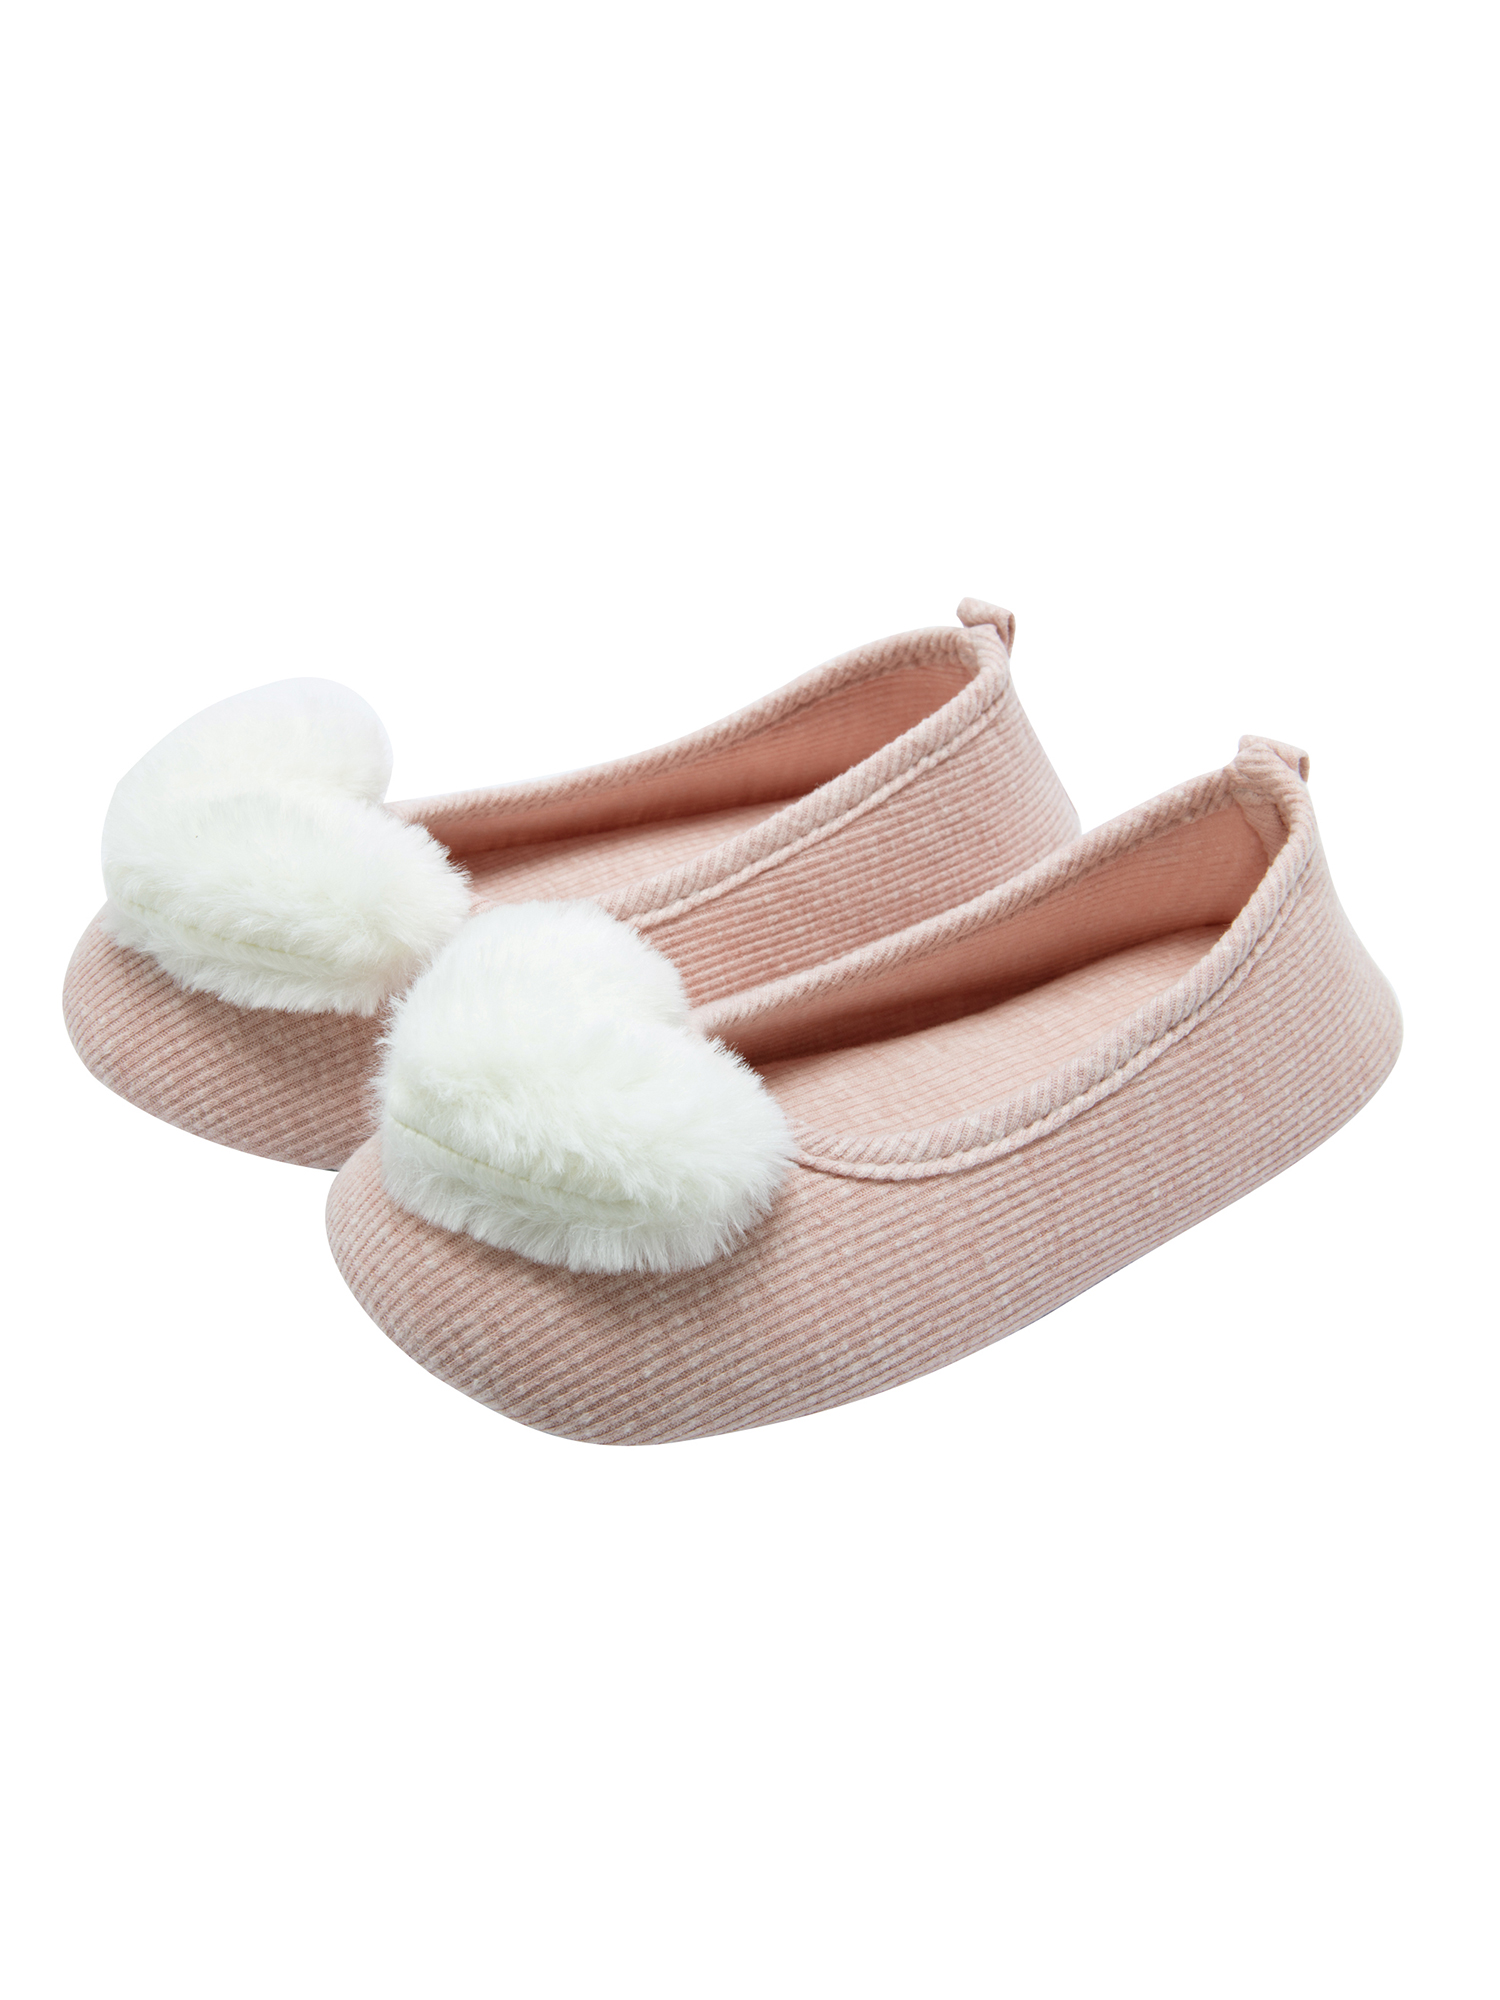 NK FASHION Women's Non-Slip Slippers Indoor House Soft Cotton Flat Shoes Non-Slip Slippers Cozy Memory Foam Slippers Slip On - image 2 of 8